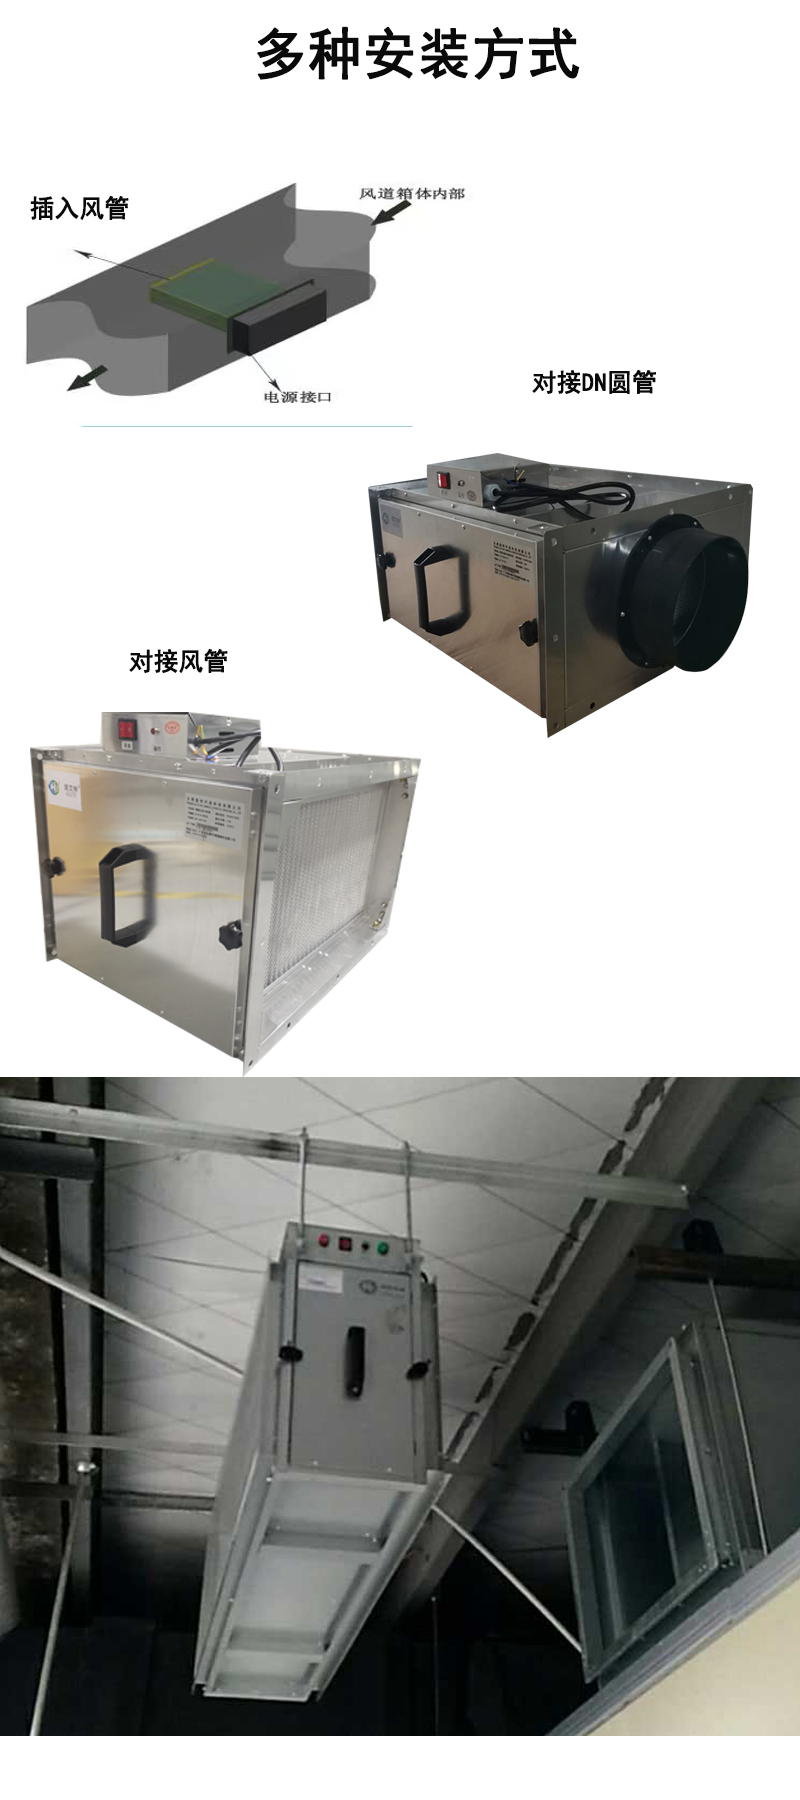 Composite air purification and disinfection device Electronic dust removal purifier Photocatalyst nano hydrogen ion purifier